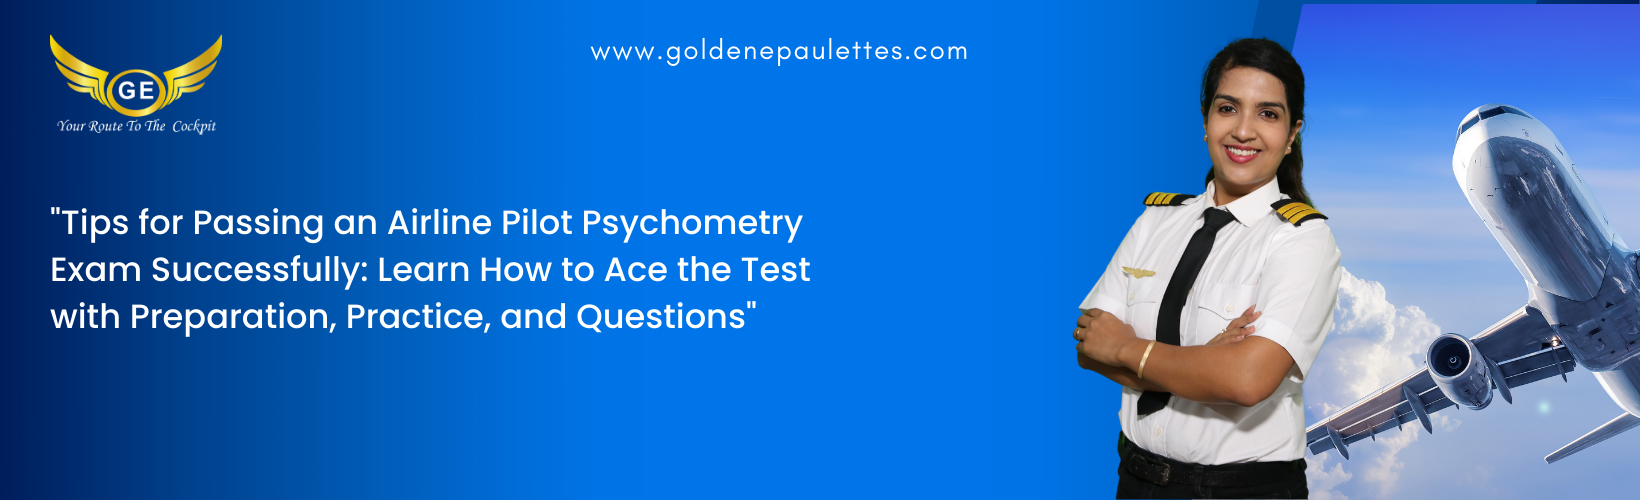 Utilizing Online Resources for Airline Pilot Psychometry Exams